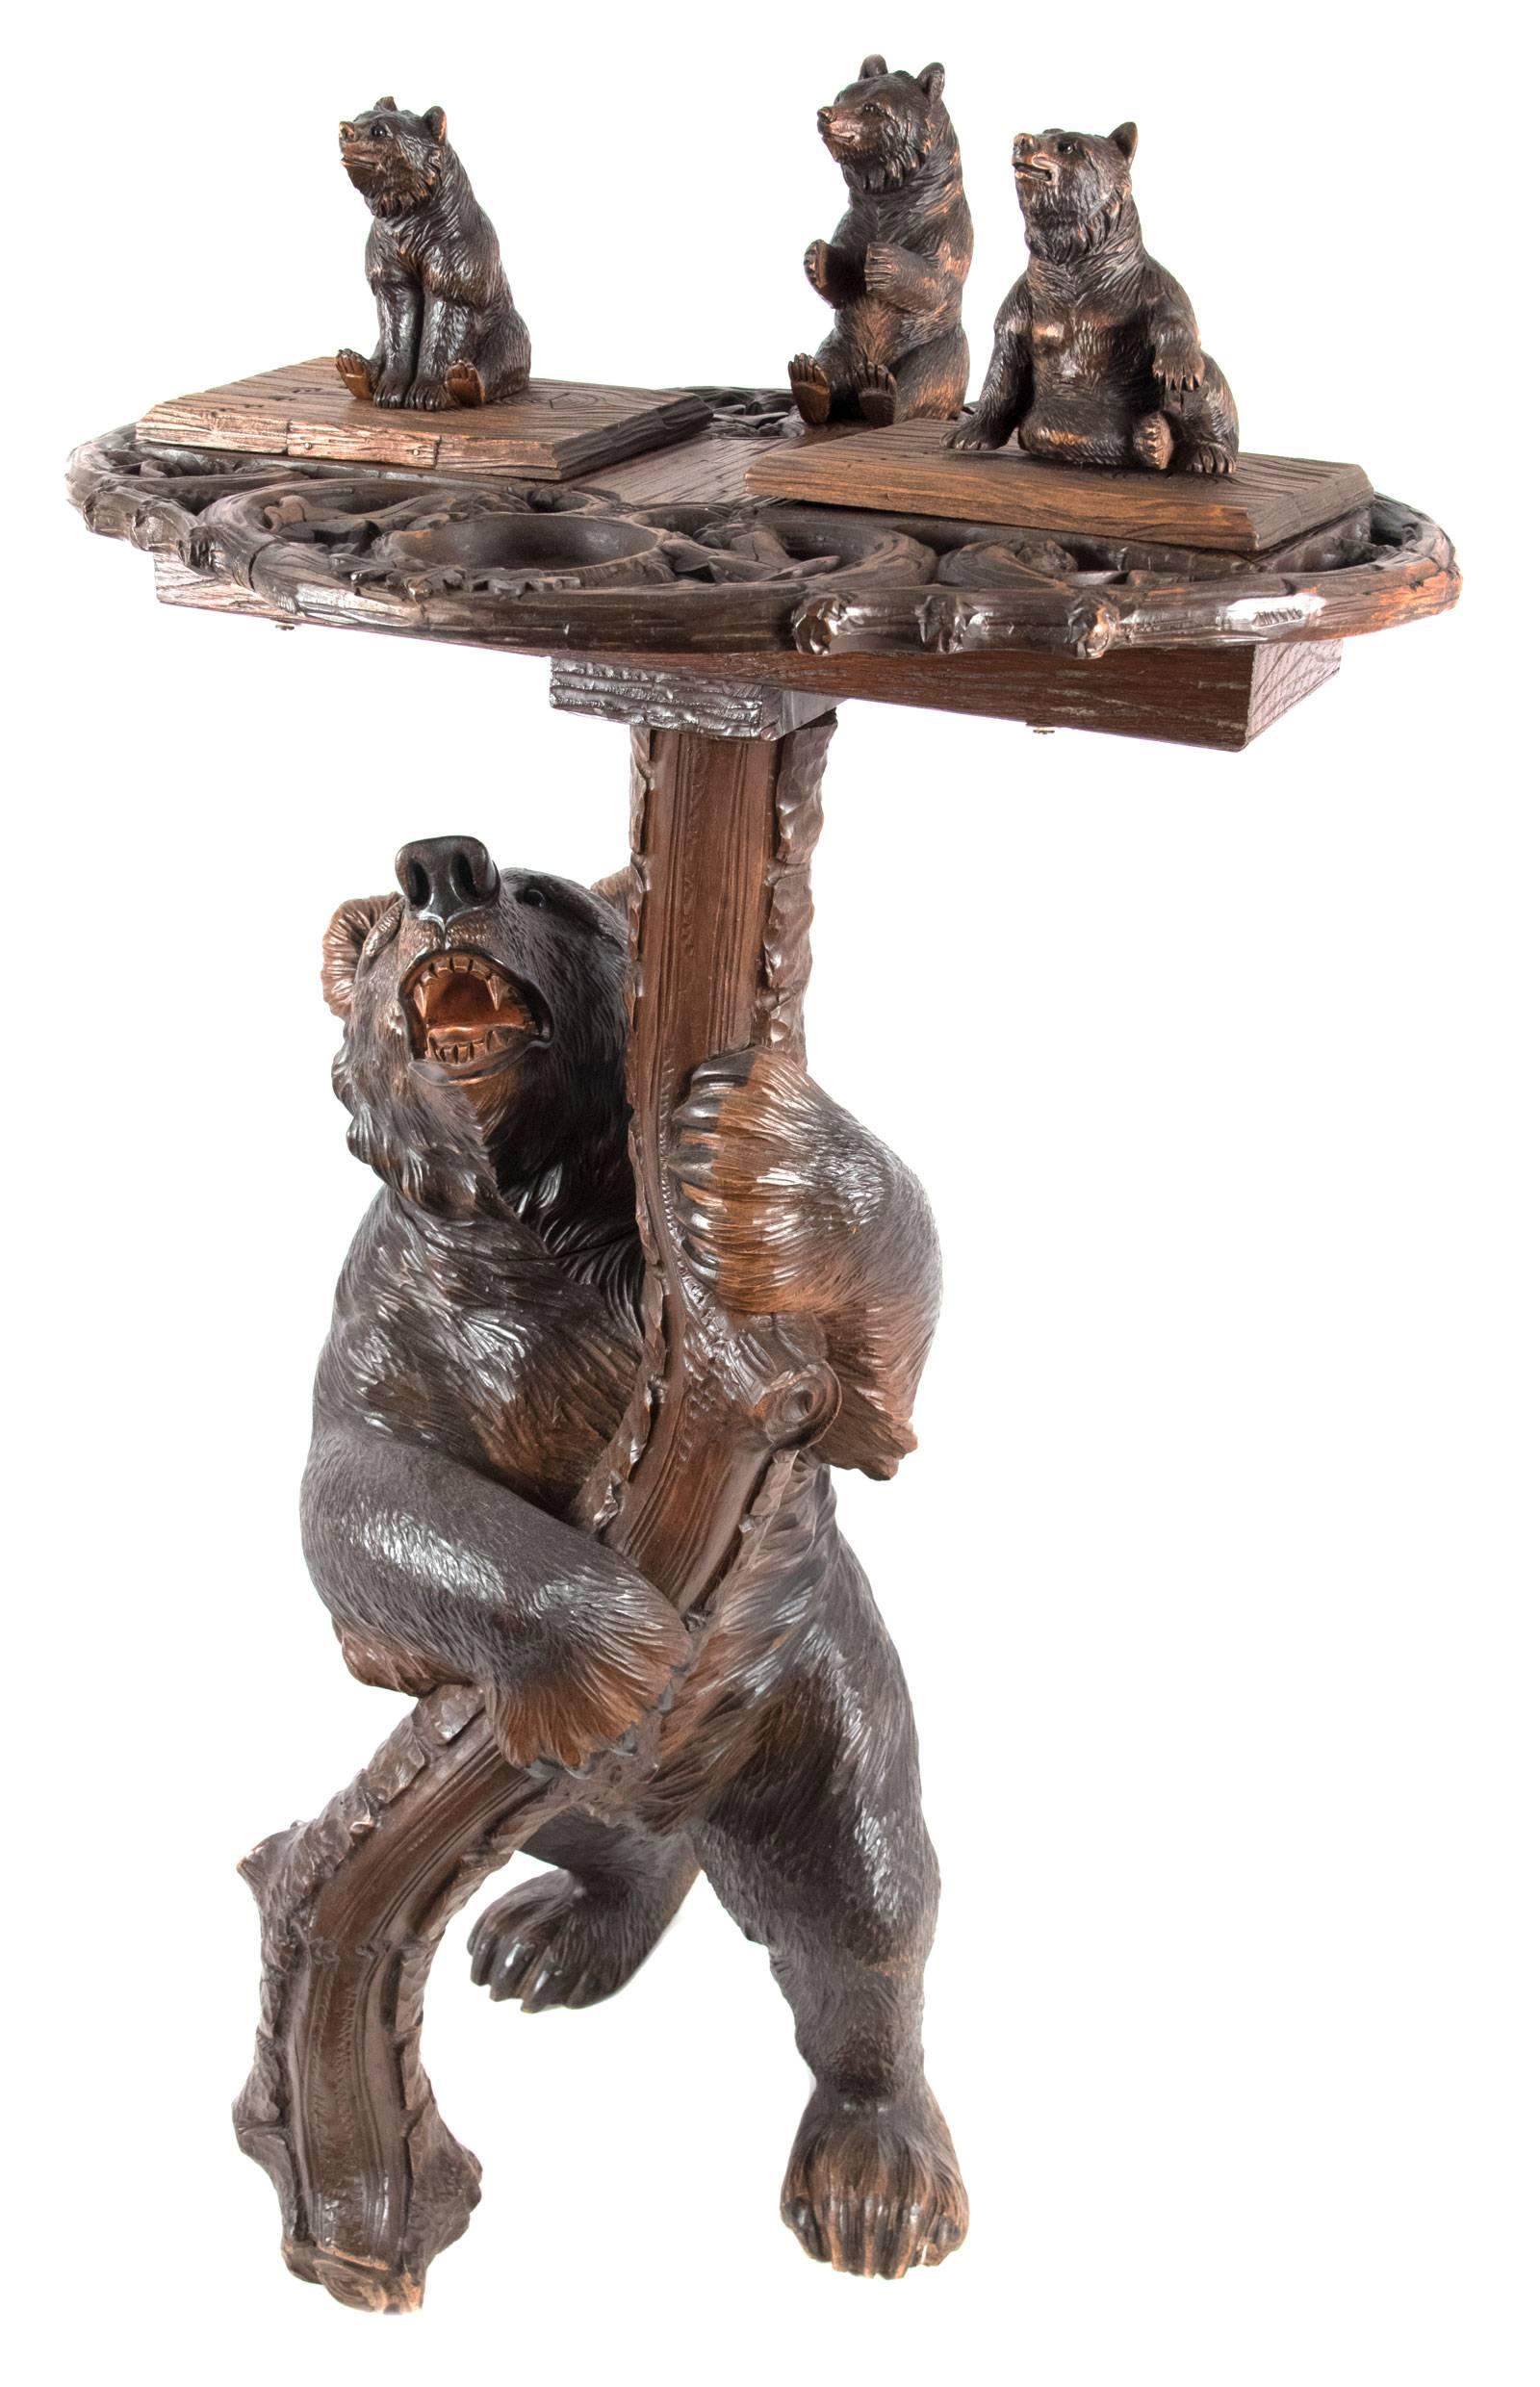 A well carved Black Forest oak smoking stand featuring a large carved bear standing upright at the base of a naturalistic tree that is supporting a stylized tray with three small bears, two of which sit on lids that open to reveal a storage